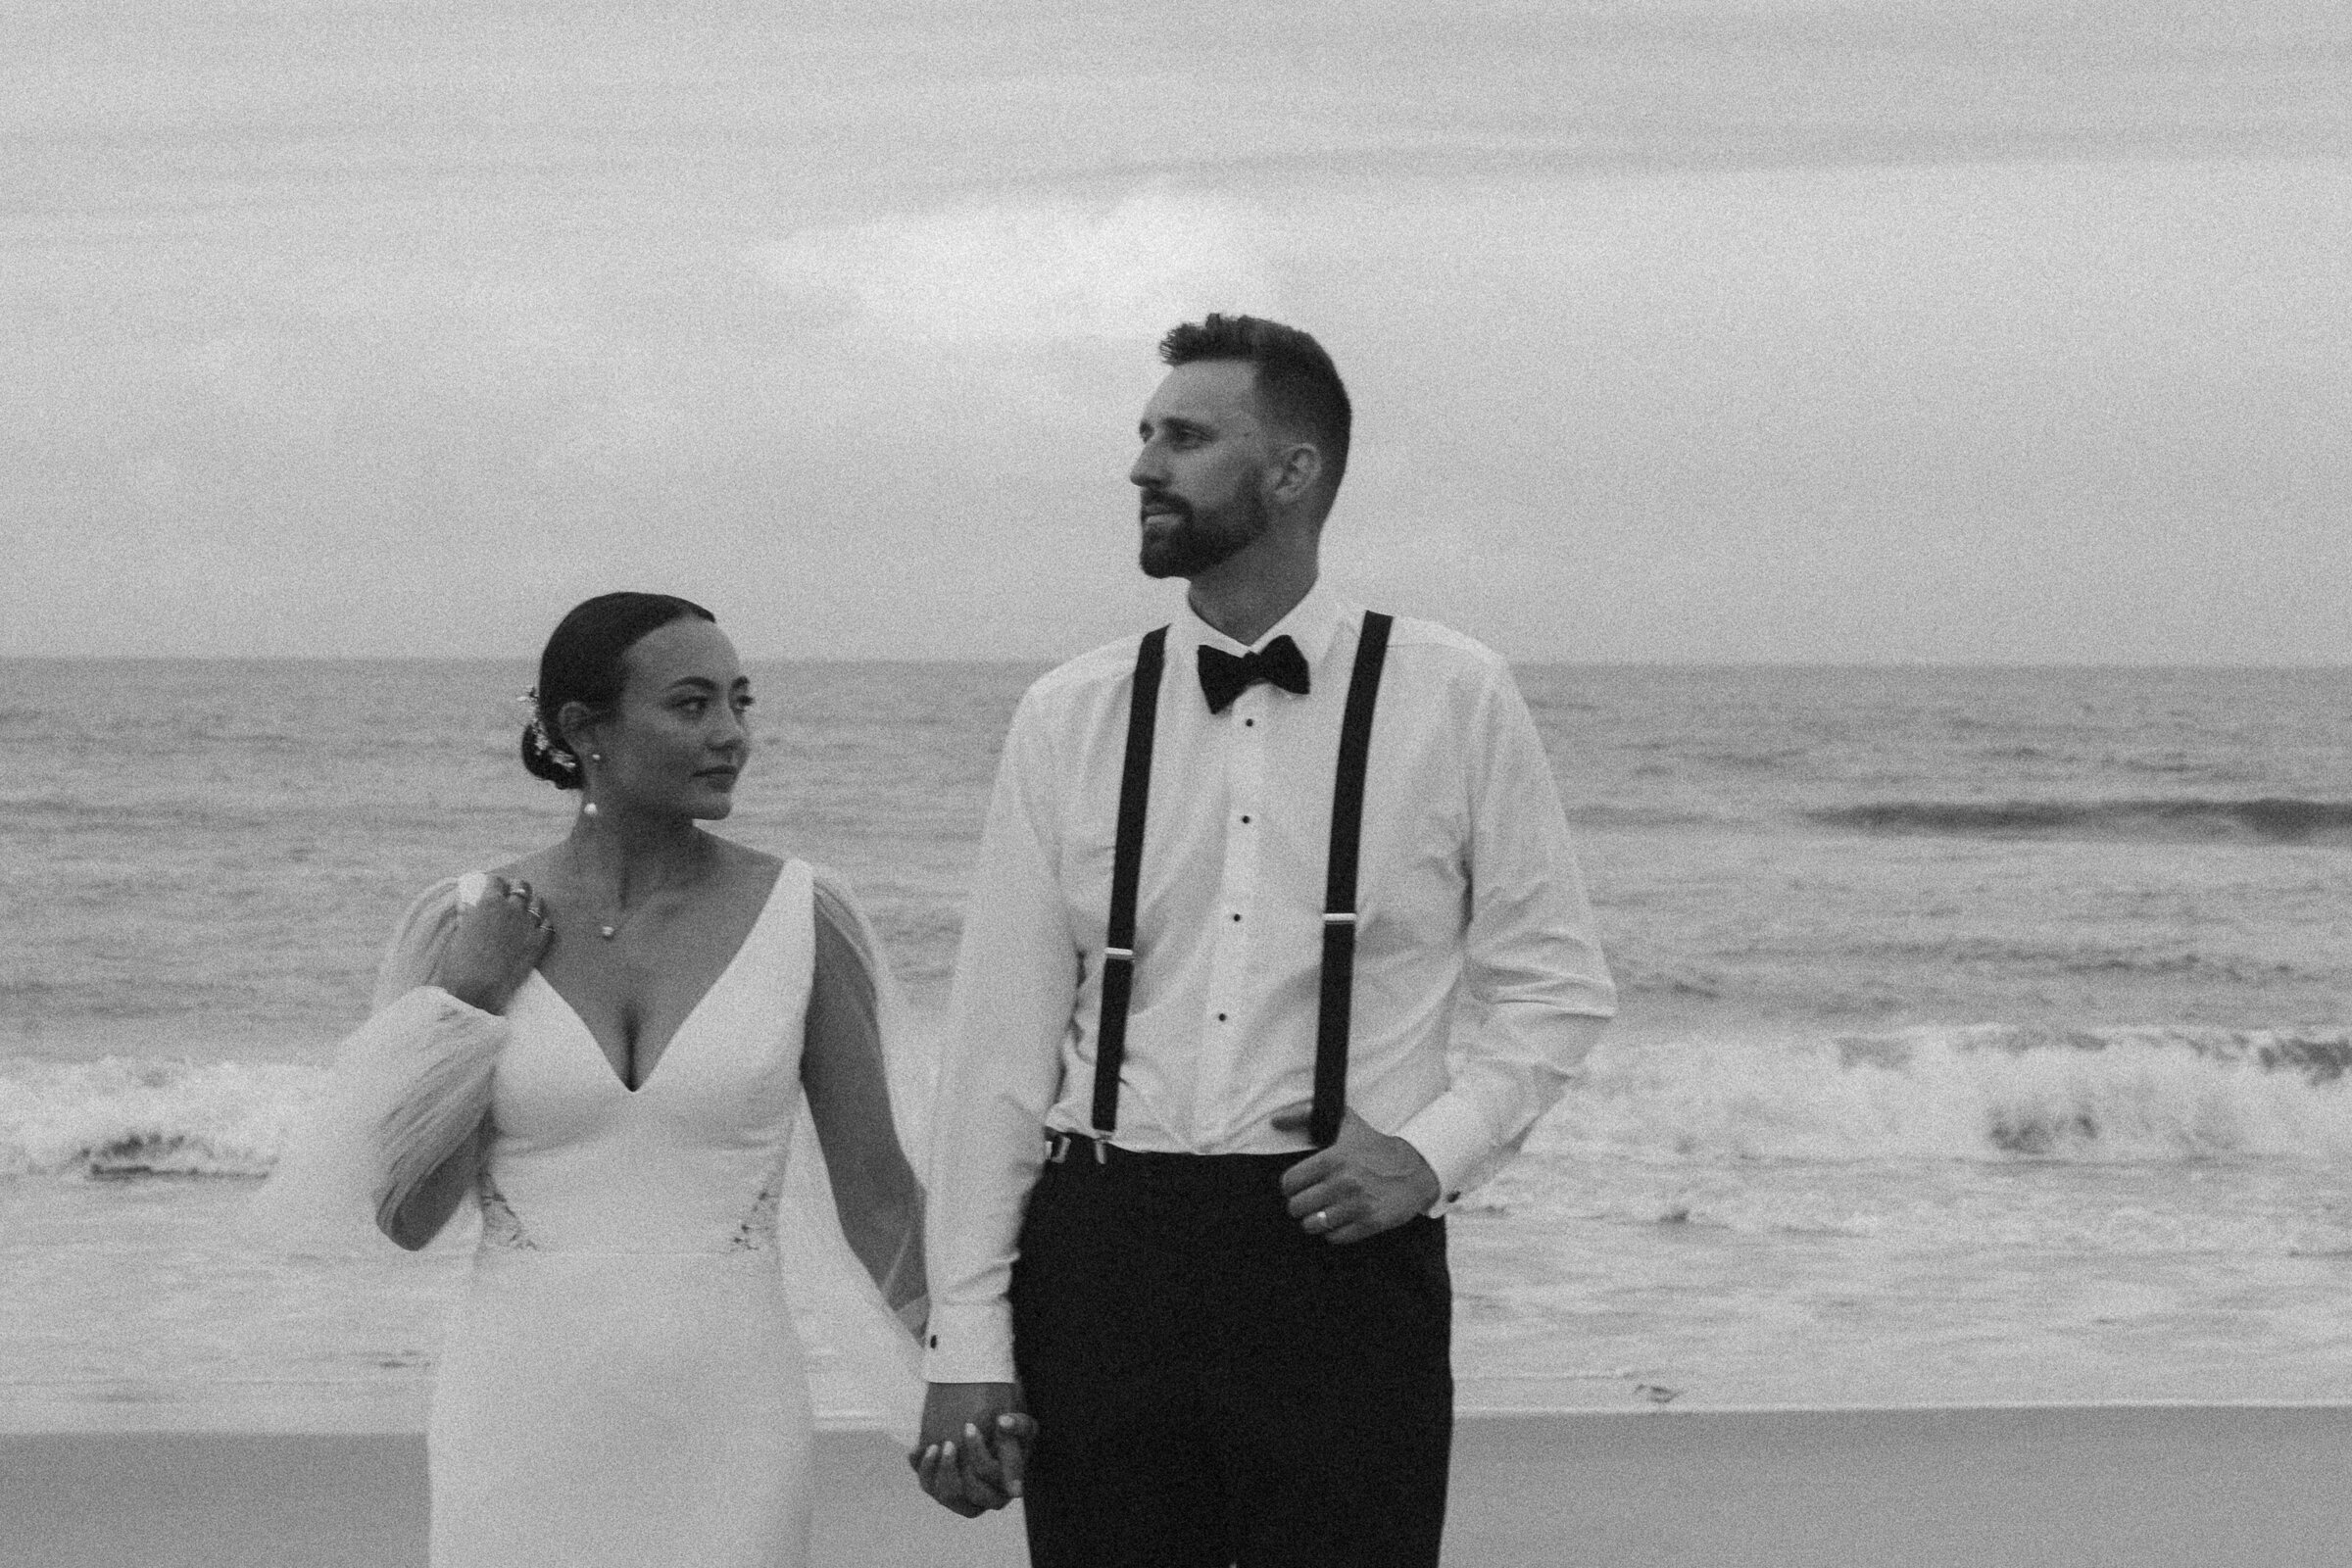 Bride and groom holding hands on the beach, black and white photo.